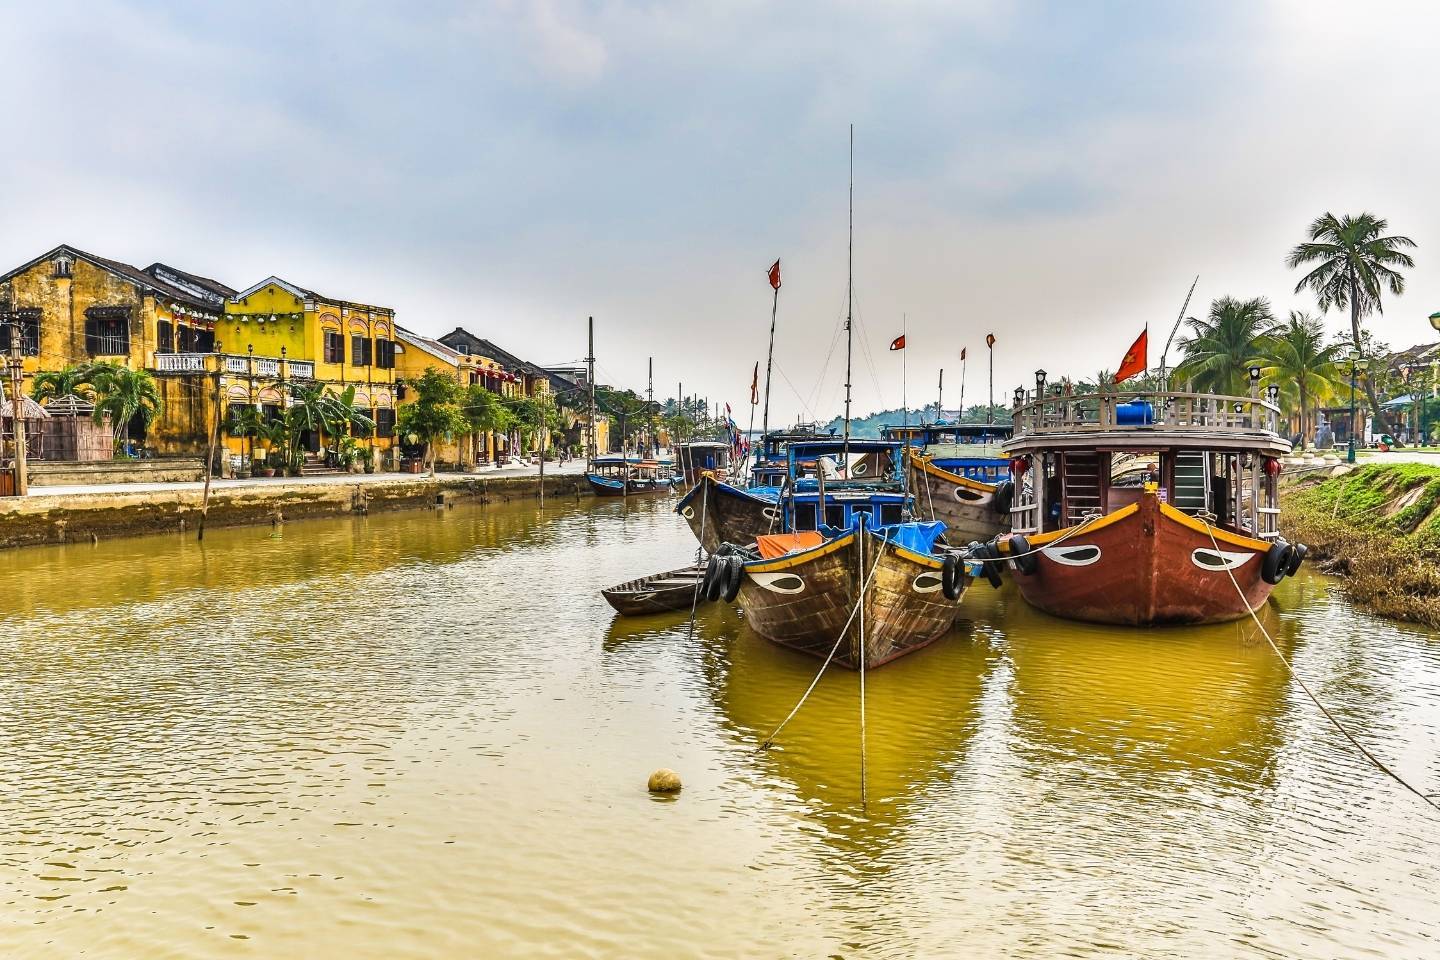 Boats on the Hoi An river